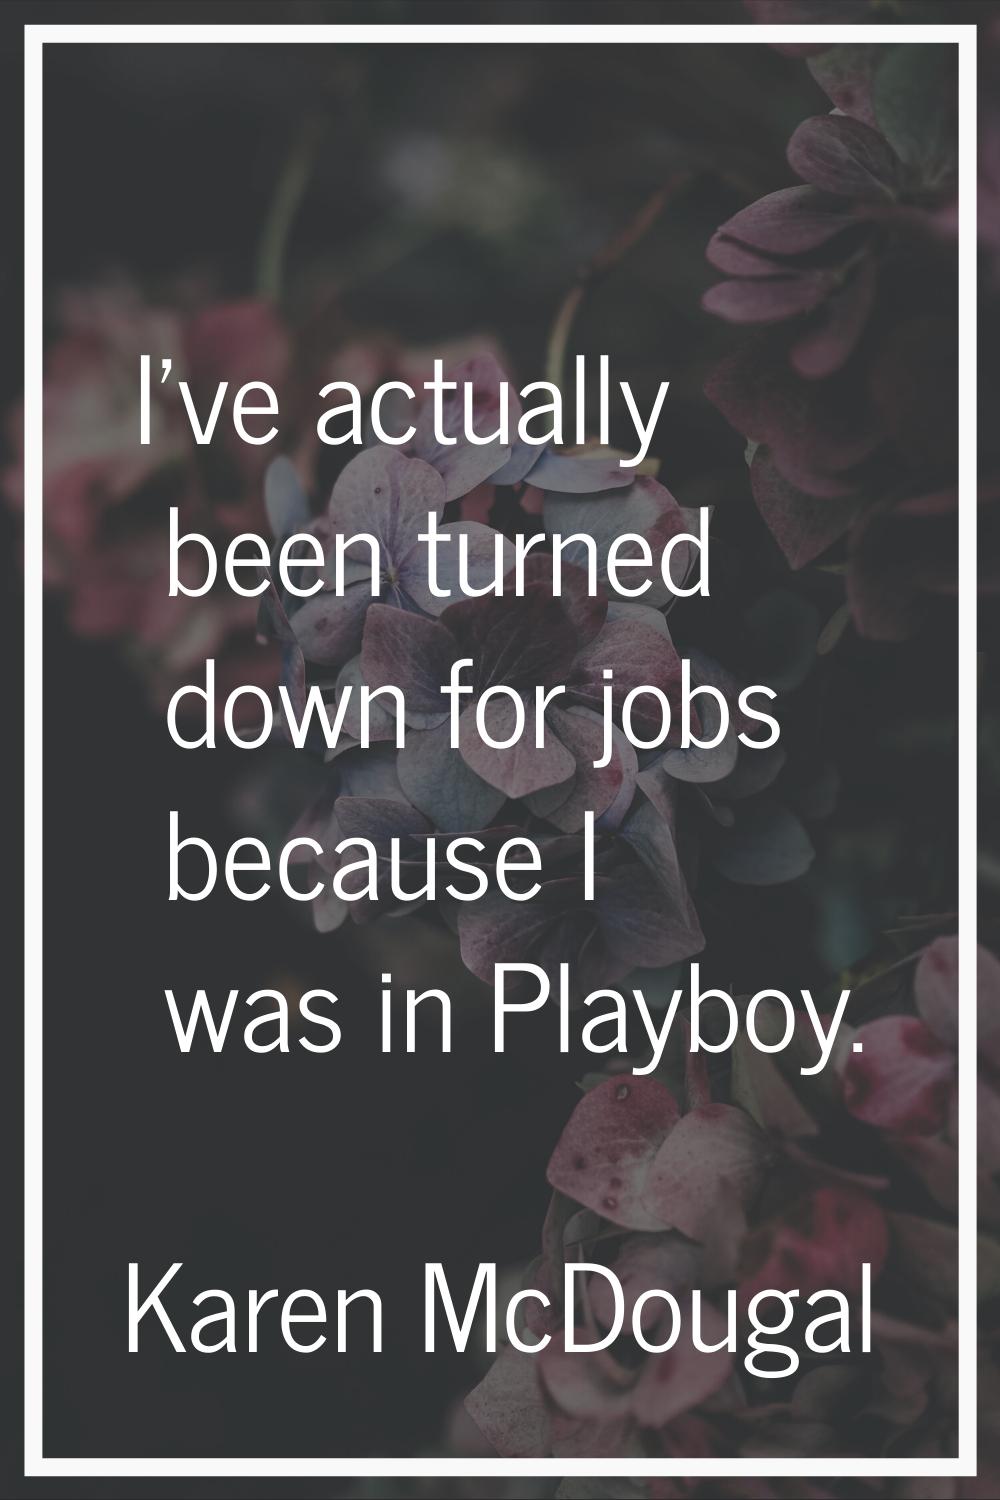 I've actually been turned down for jobs because I was in Playboy.